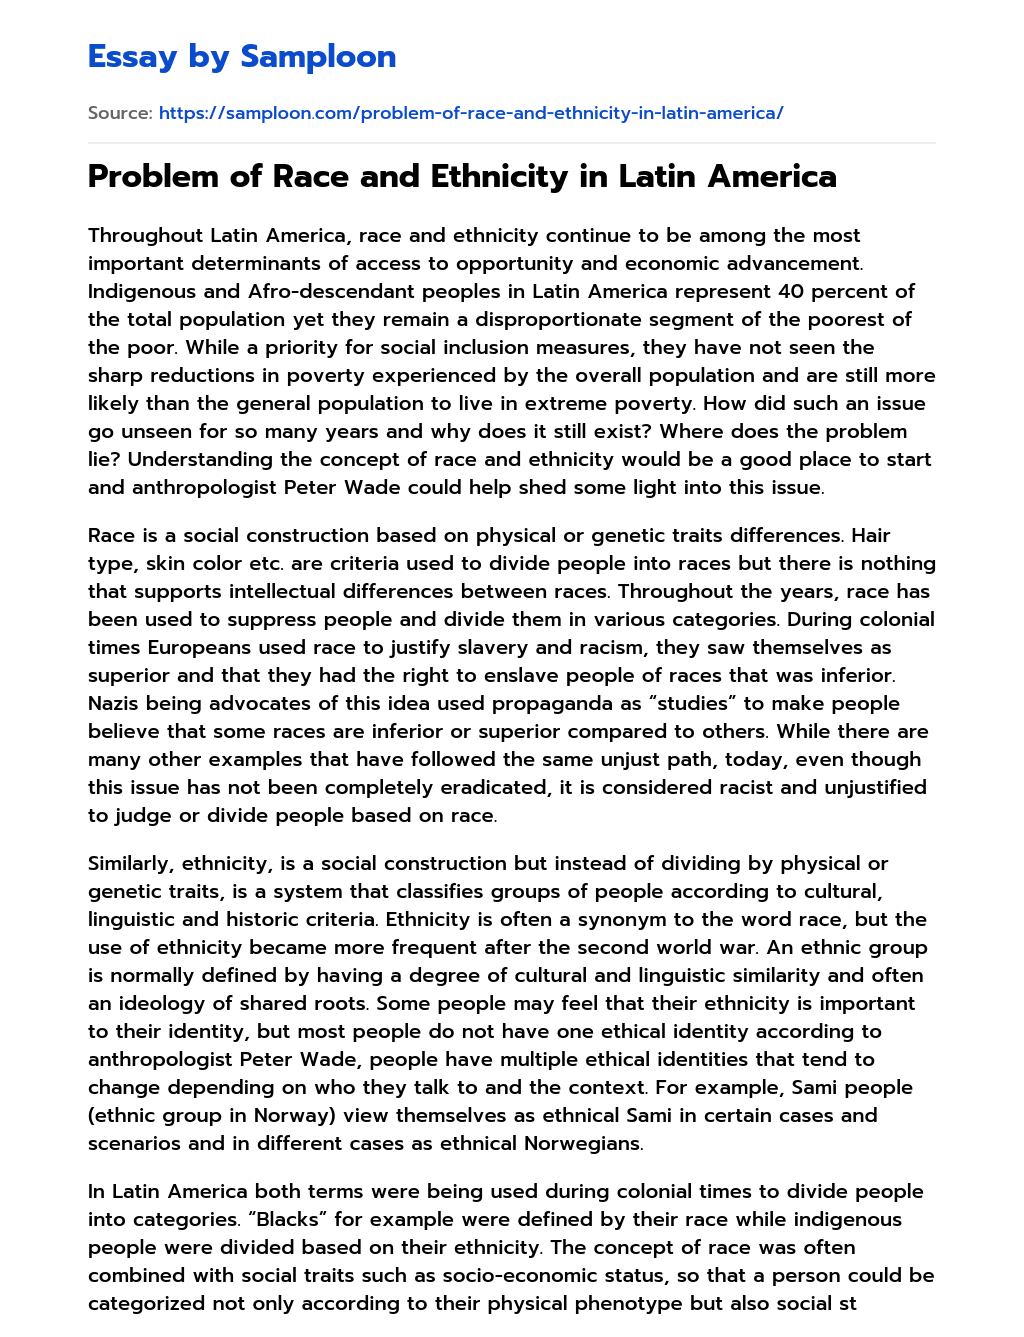 Problem of Race and Ethnicity in Latin America essay